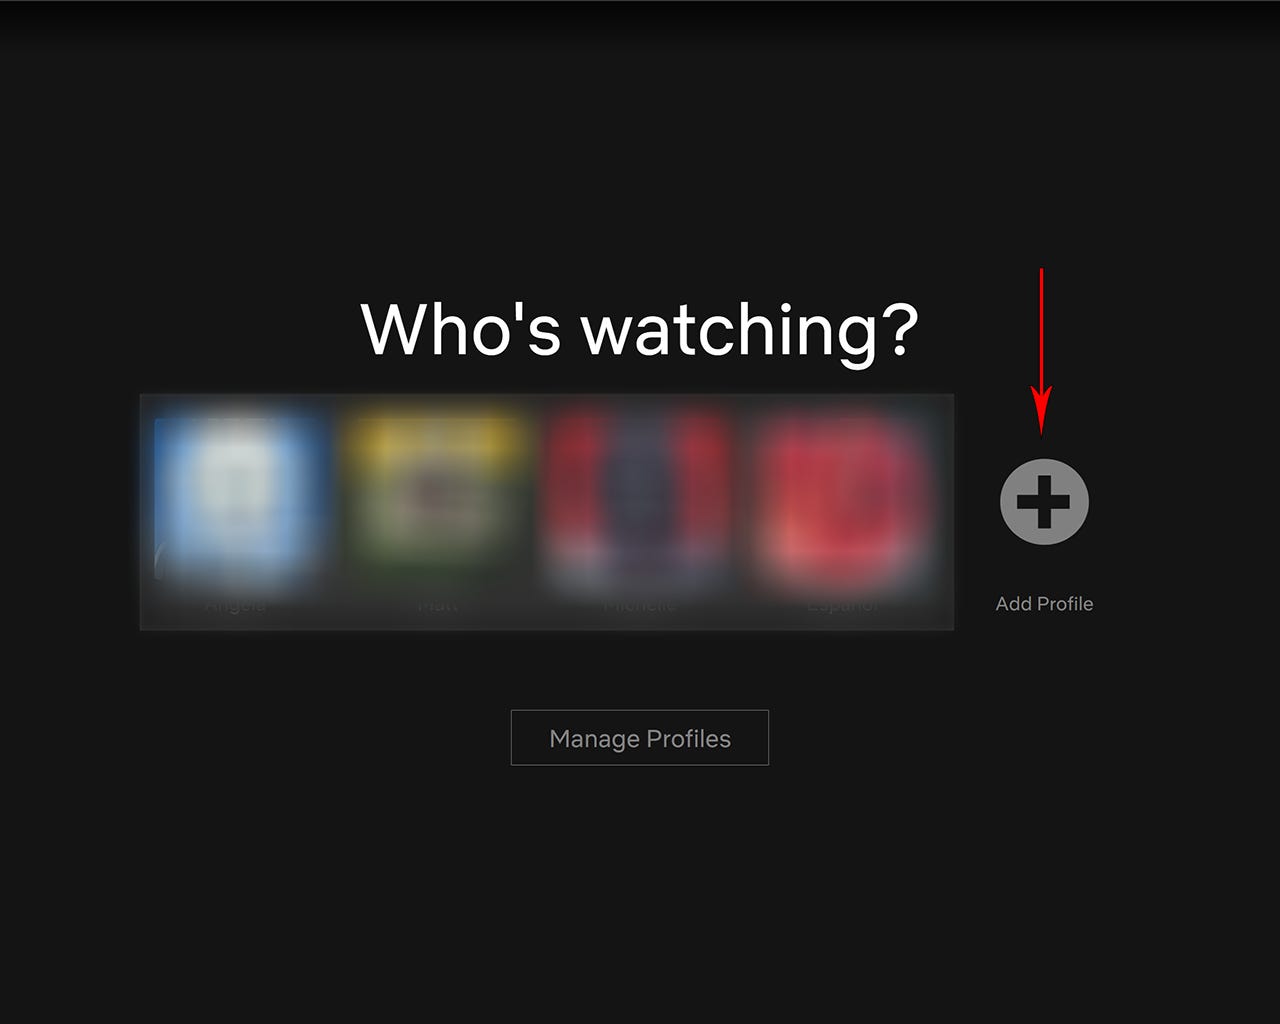 The "Who's Watching" page in Netflix, with a row of profile avatars and an "Add Profile" plus sign at the right end of the row.